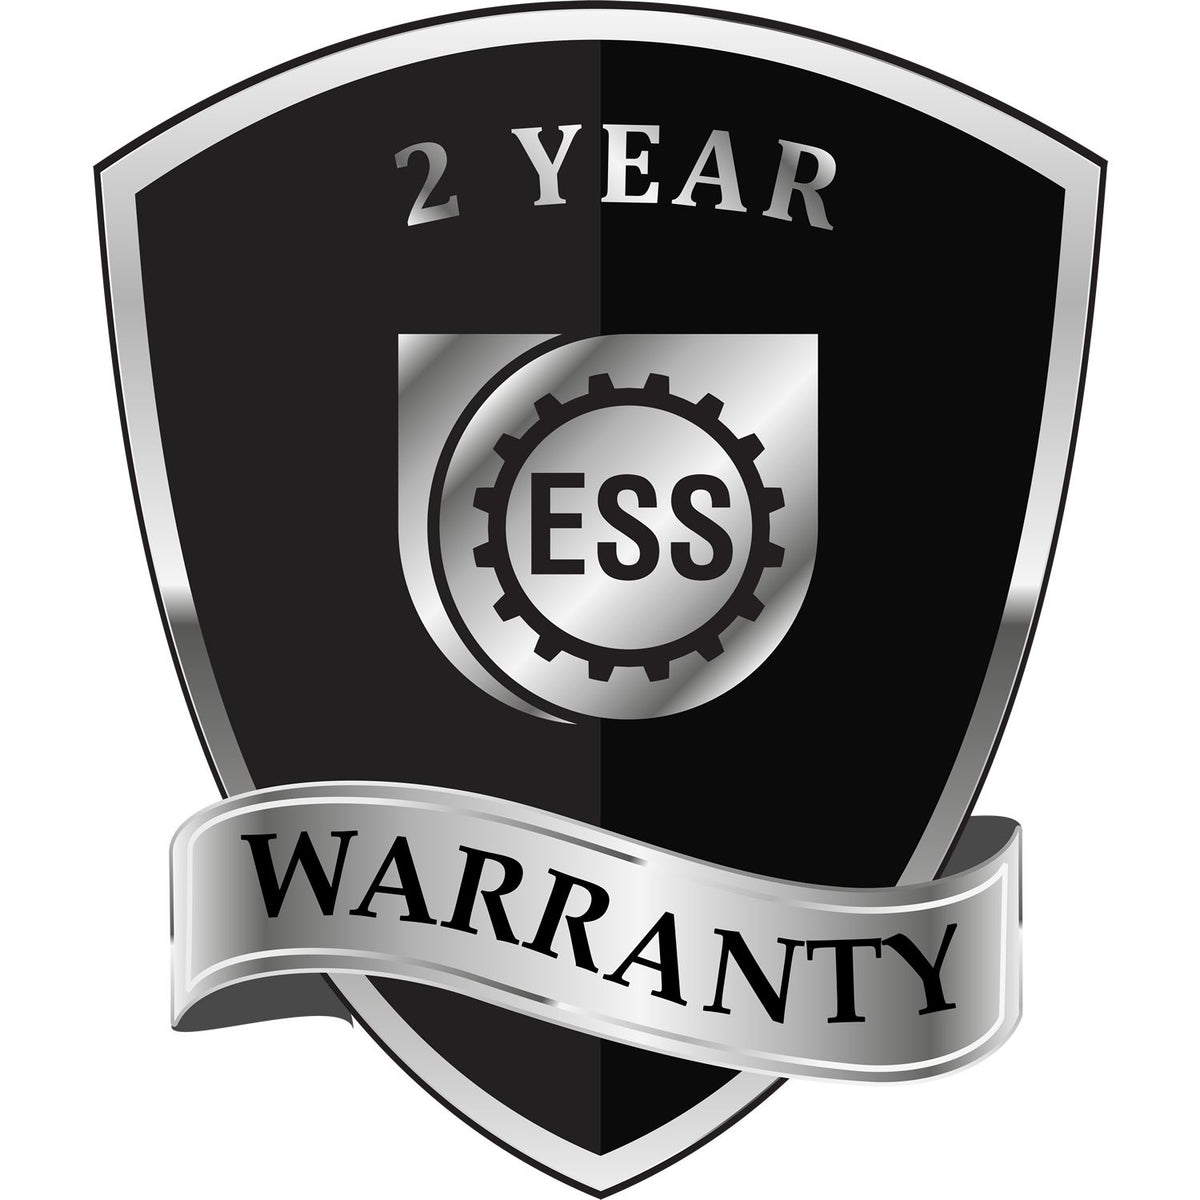 A badge or emblem showing a warranty icon for the Extended Long Reach Virginia Architect Seal Embosser